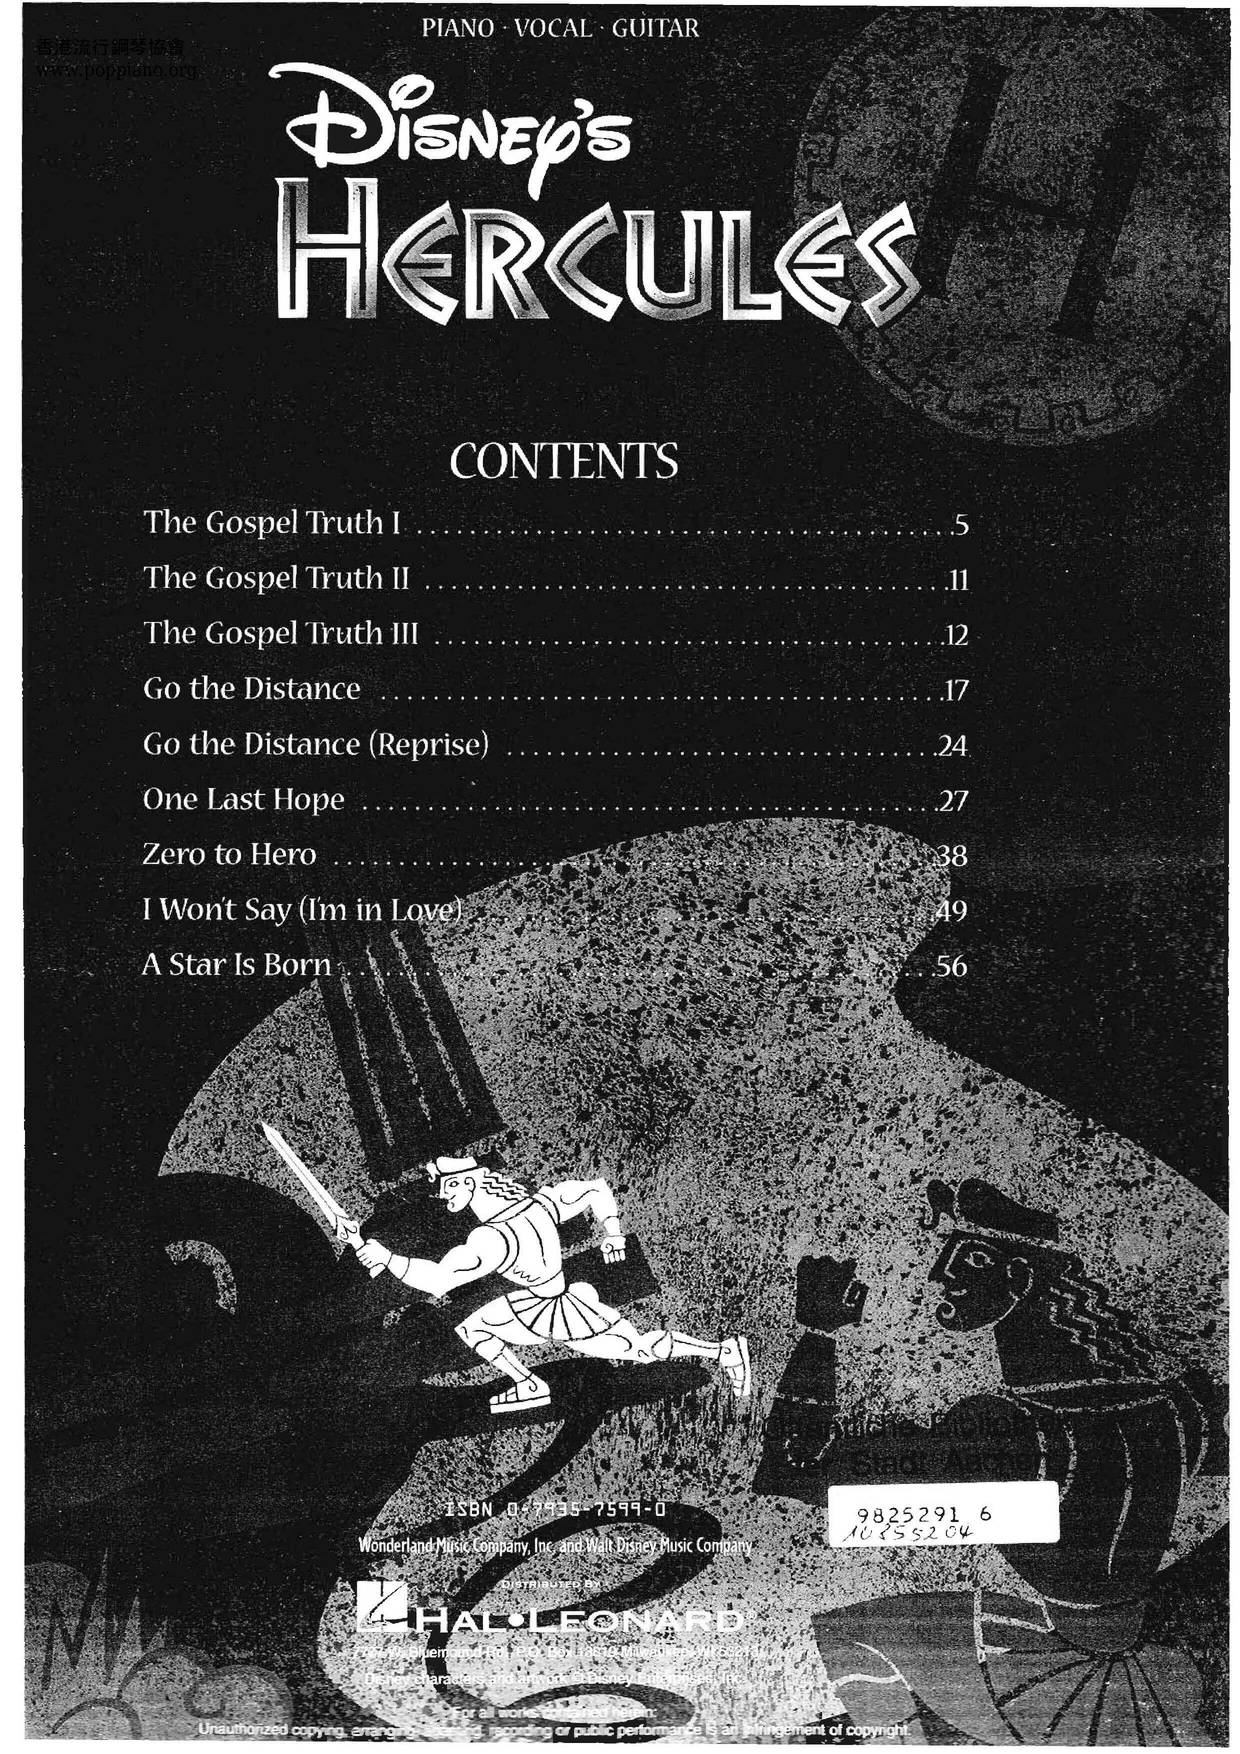 Hercules - Song Book 48 Pages琴谱